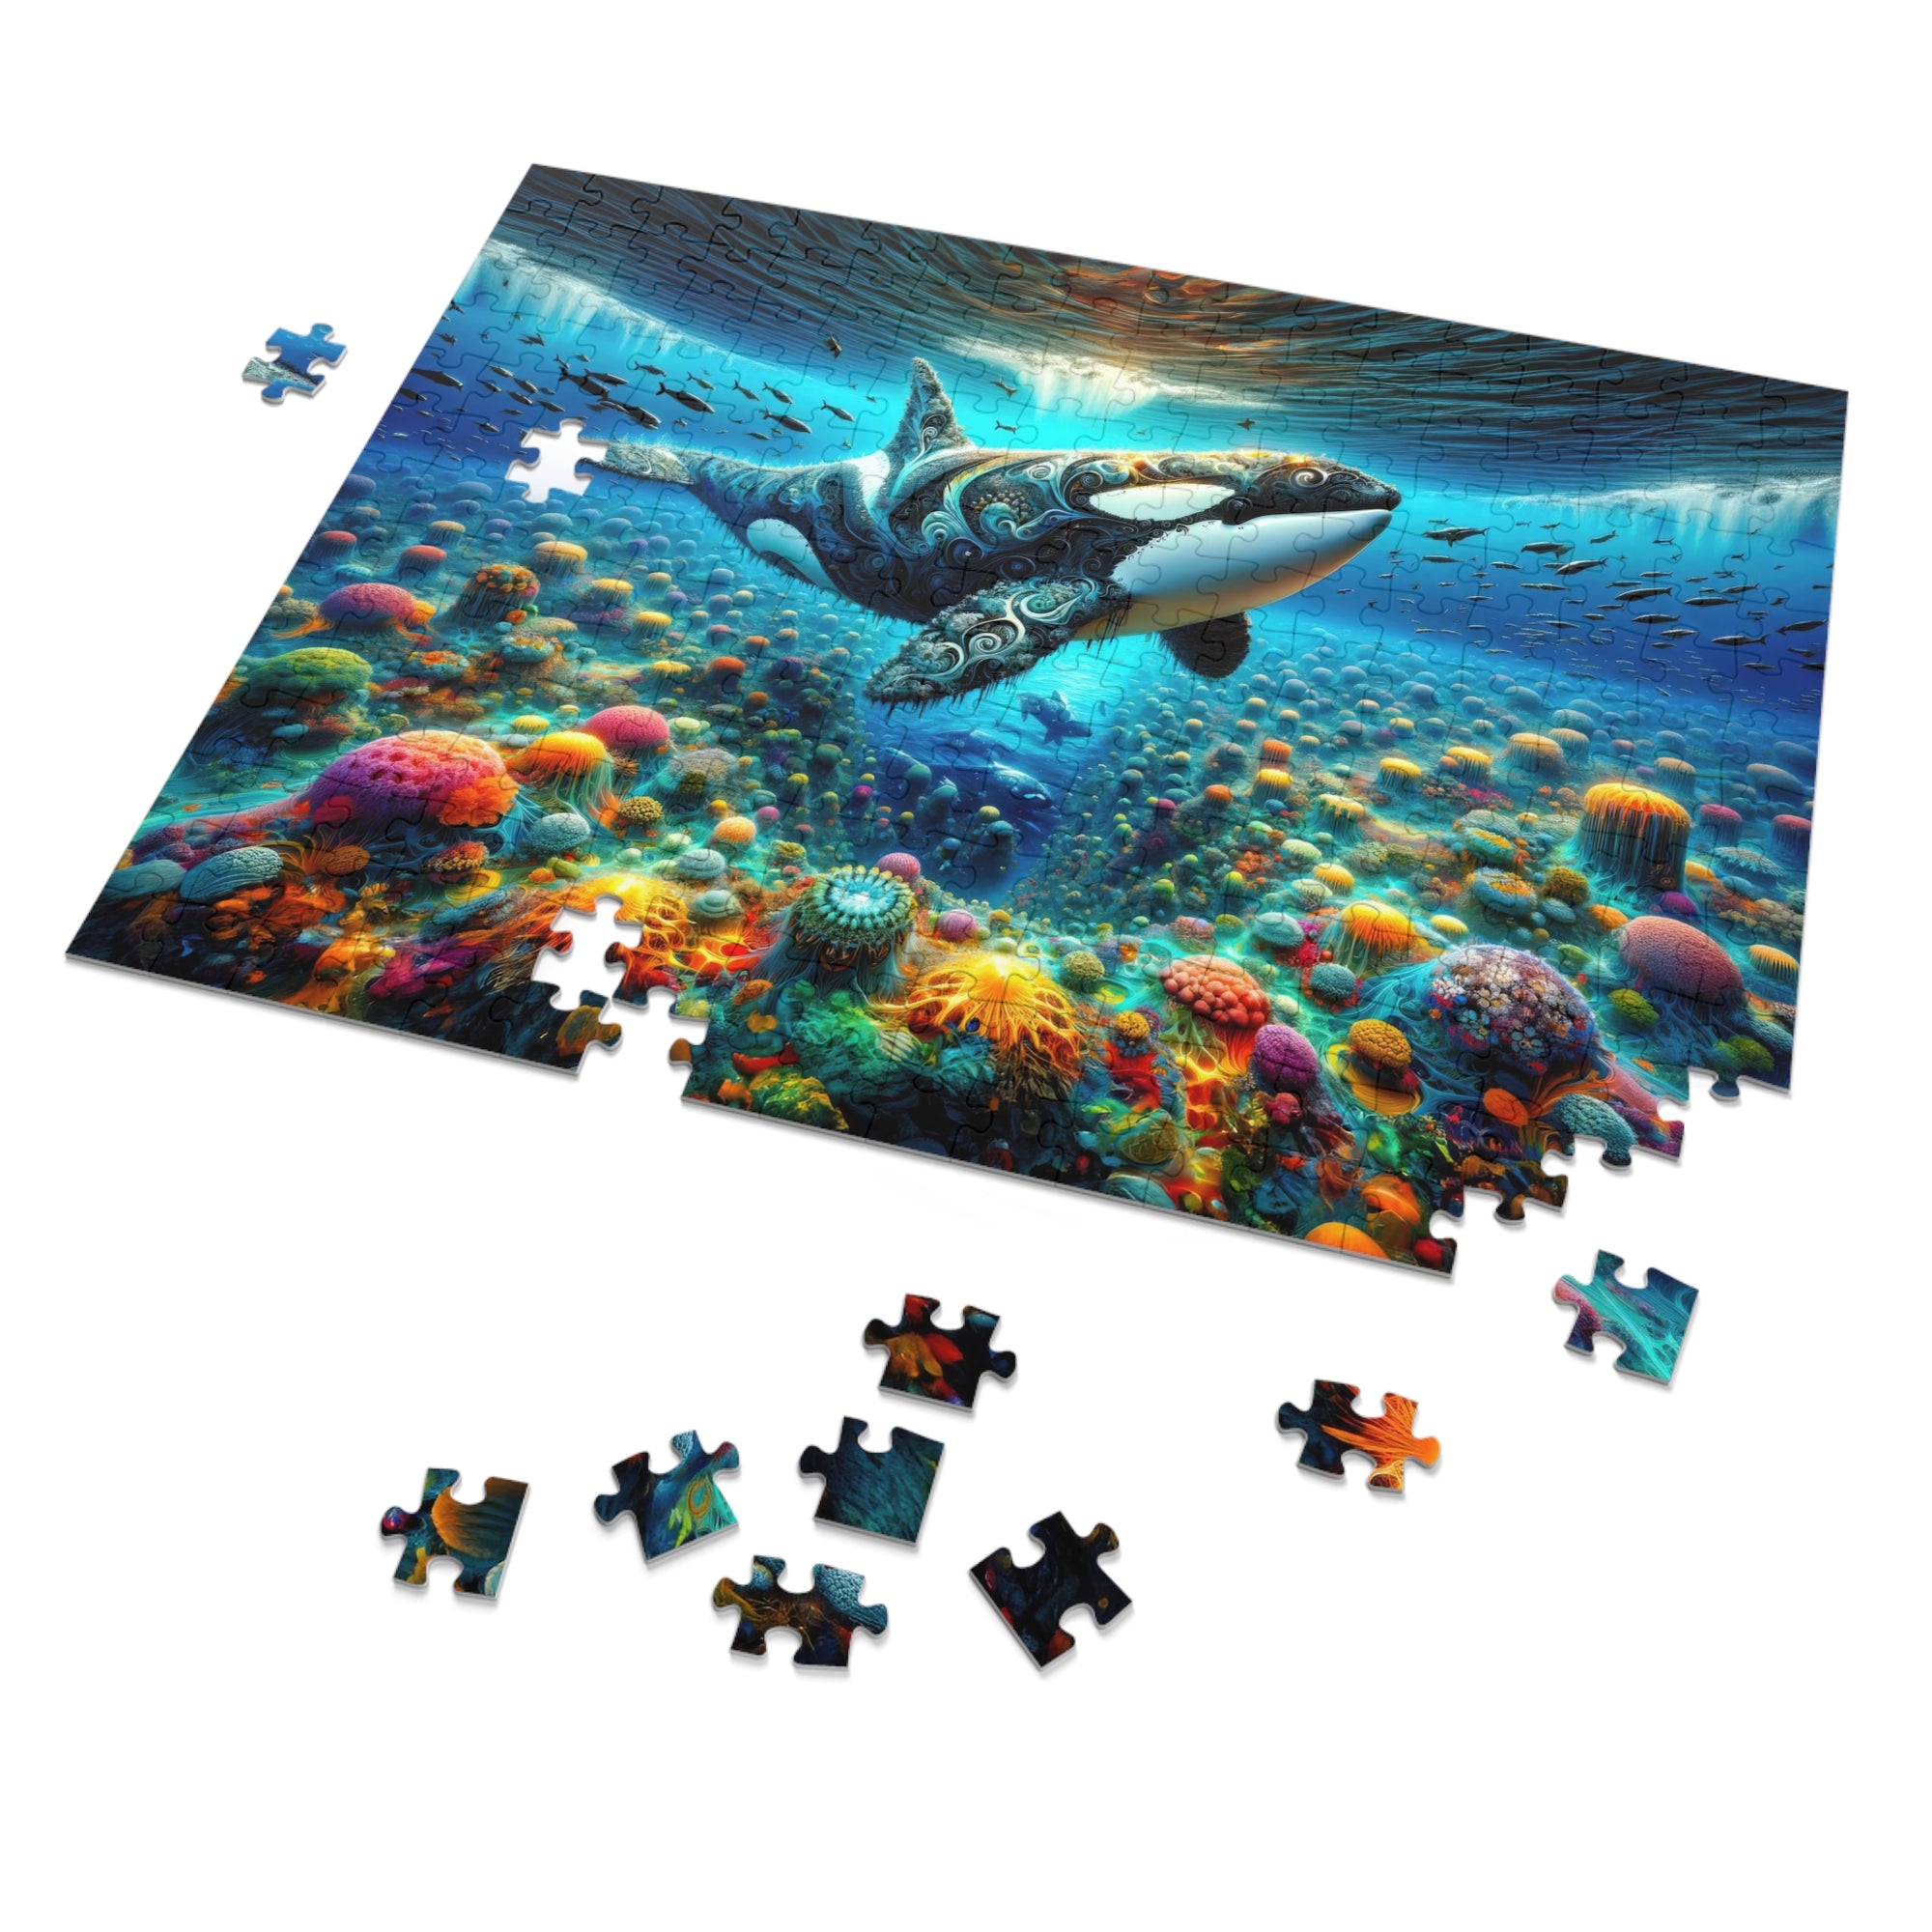 The Sovereign of Spiral Reefs Jigsaw Puzzle